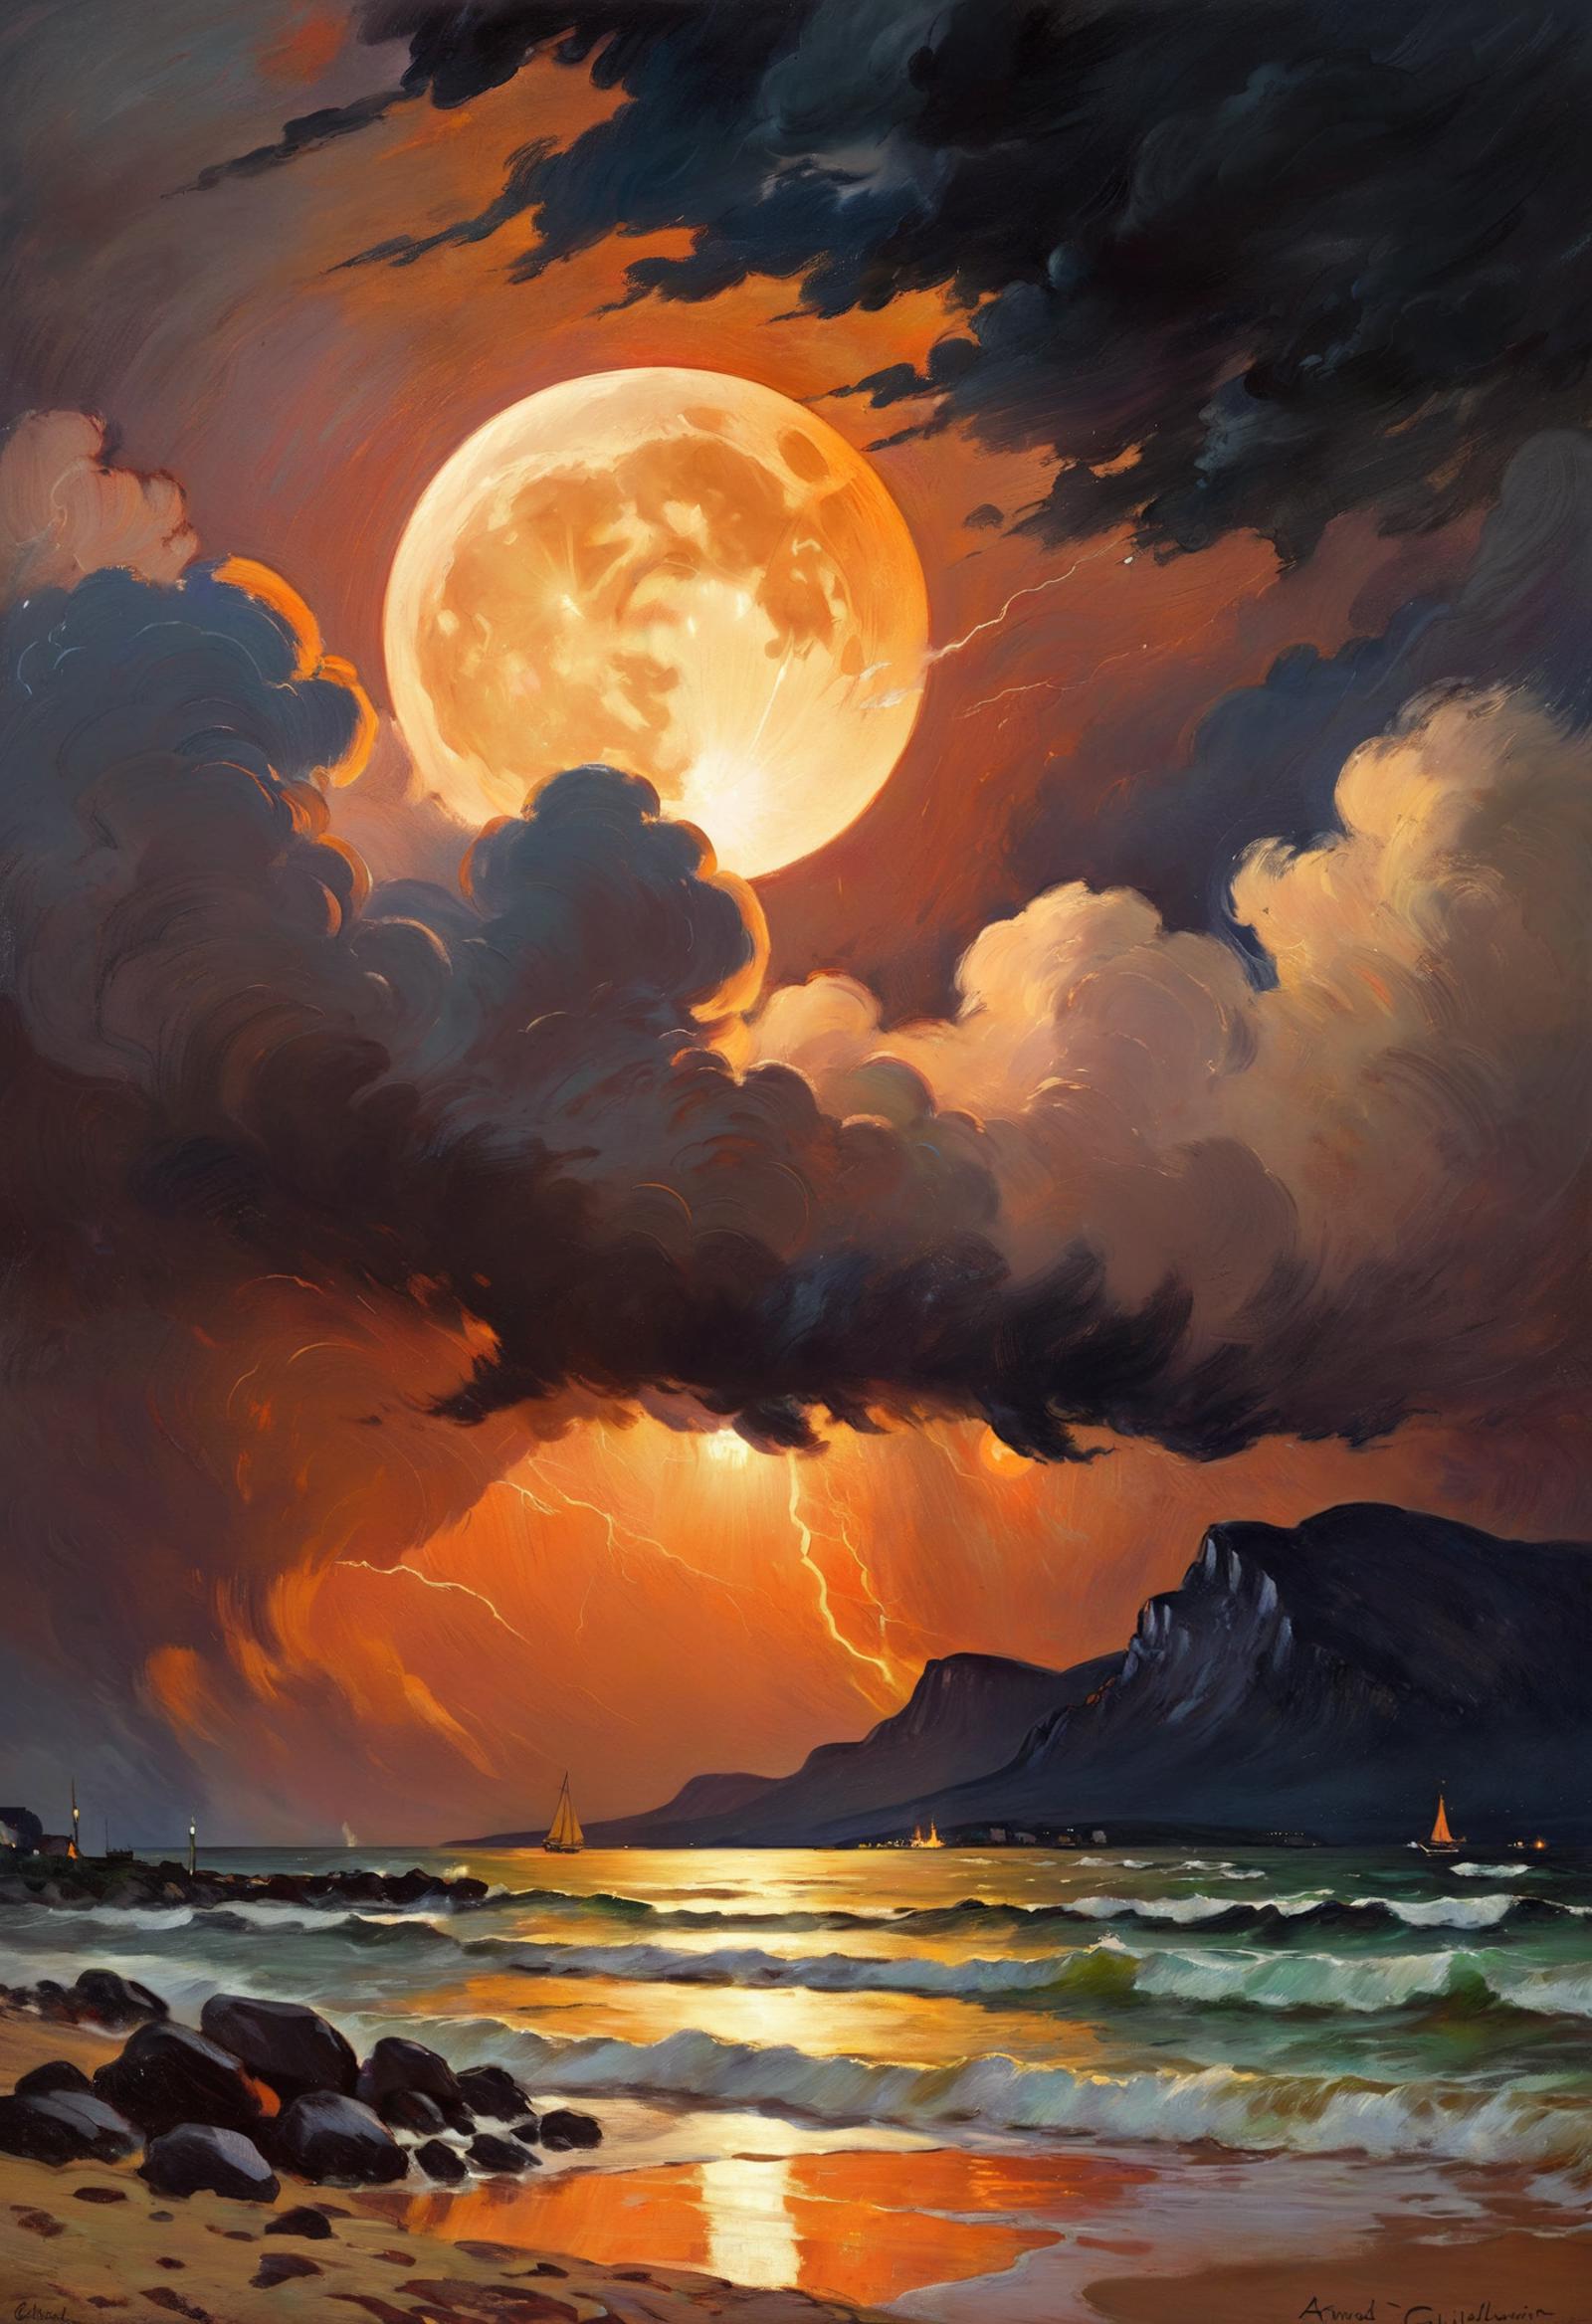 A painting of a full moon over a stormy ocean with sailboats and clouds.